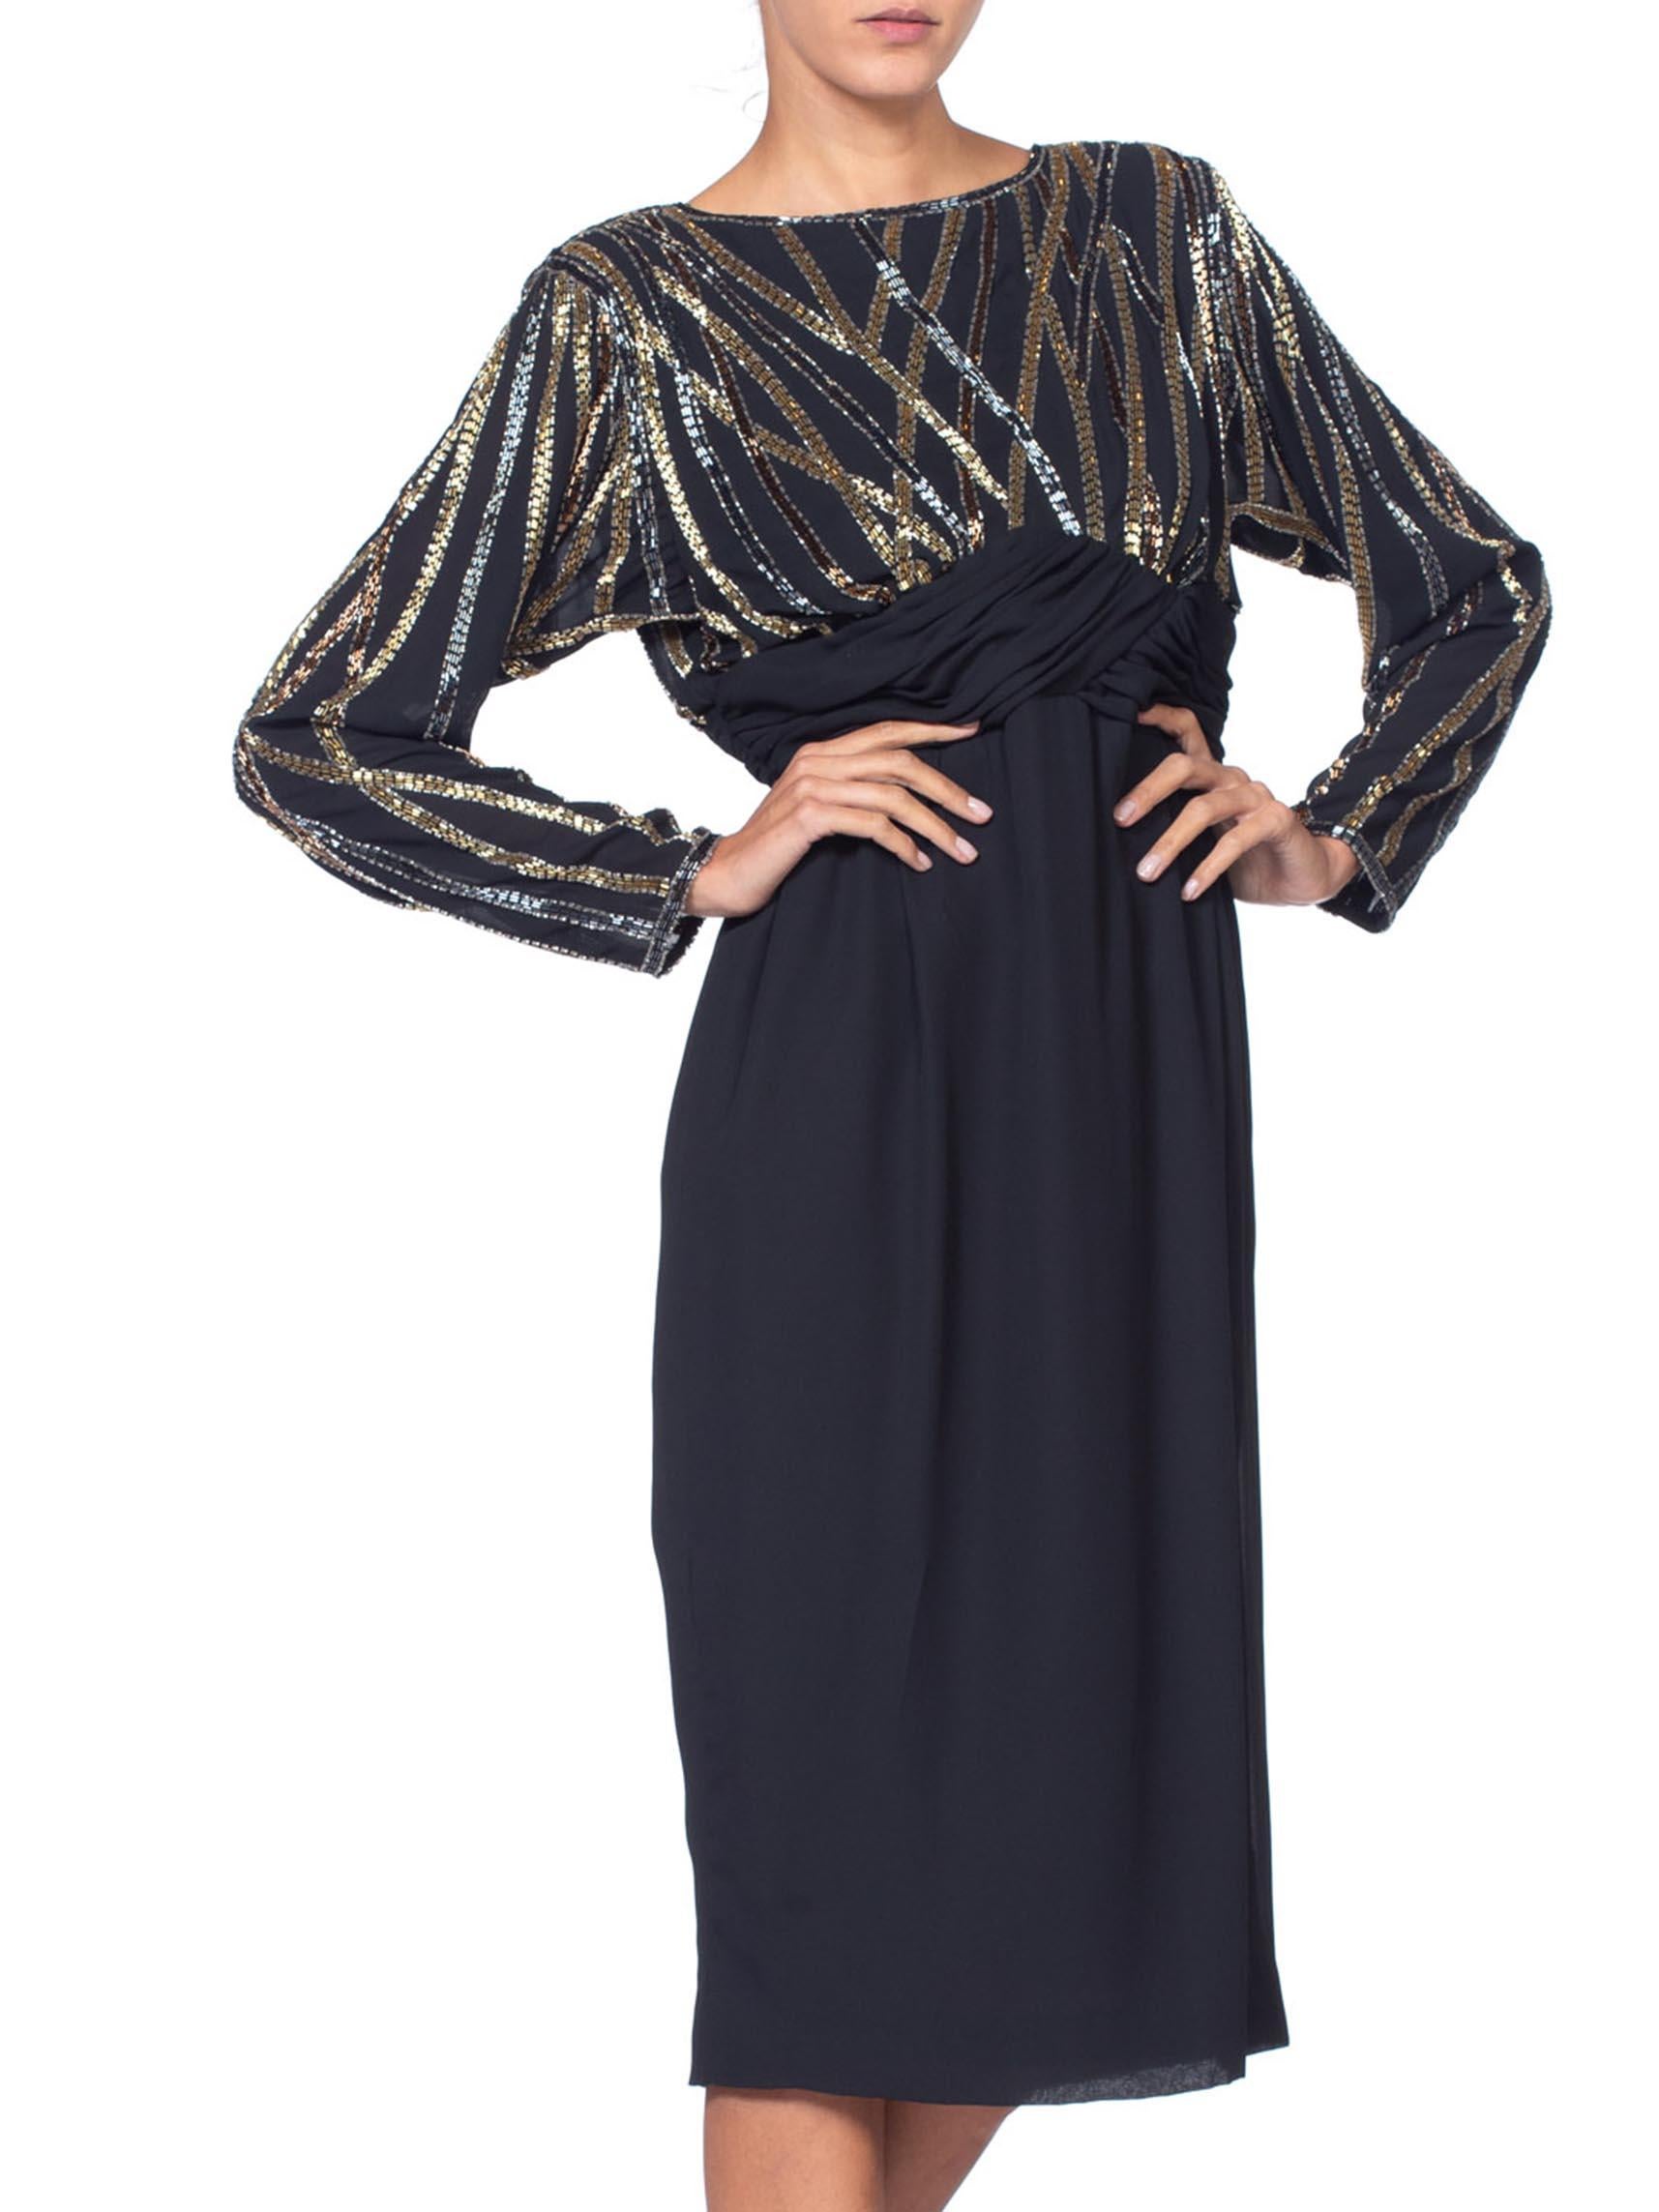 1980S BOB MACKIE Style Black Hand Beaded Polyester Chiffon Long Sleeve Cocktail For Sale 1